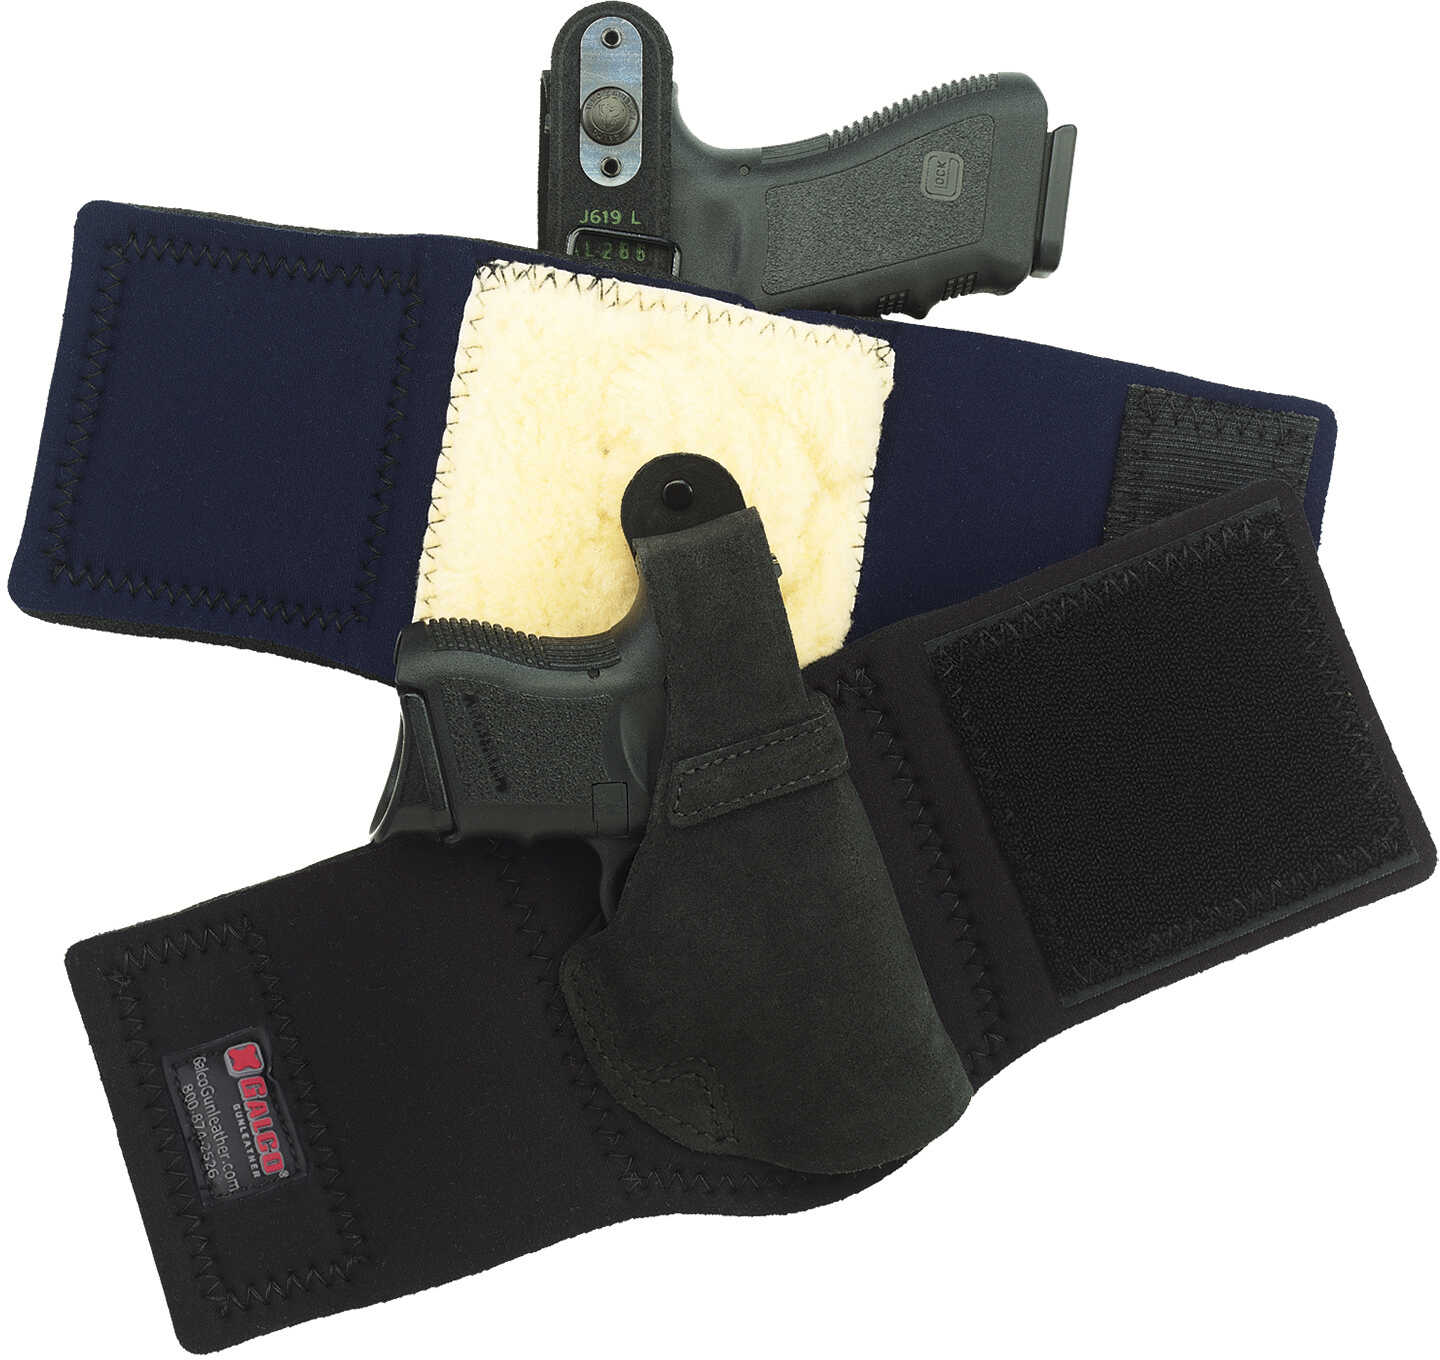 Galco Ankle Lite Ankle Holster Black RH Fits Glock 26 27 33 S&W M&P 2.0 Compact 3.6" 9/40, M&P Compact 9/40